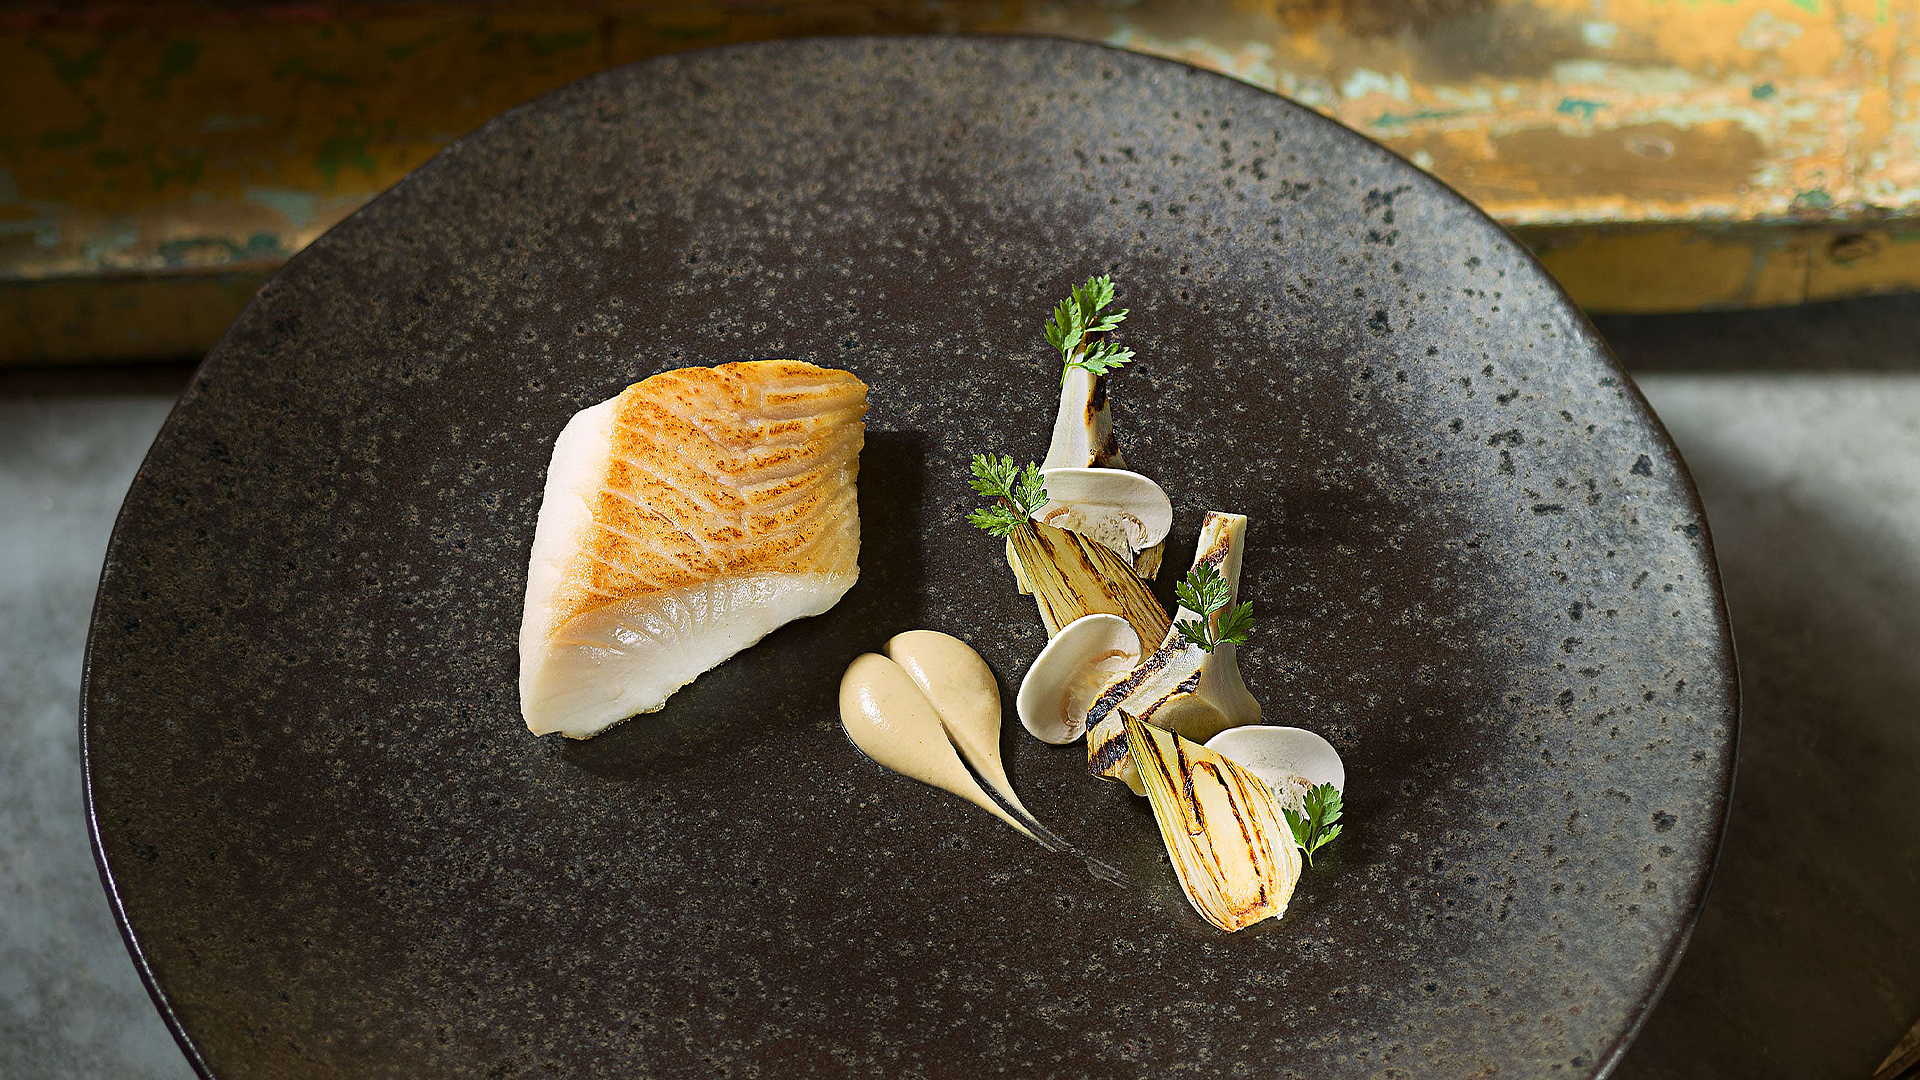 Black cod with artichokes and spring onions